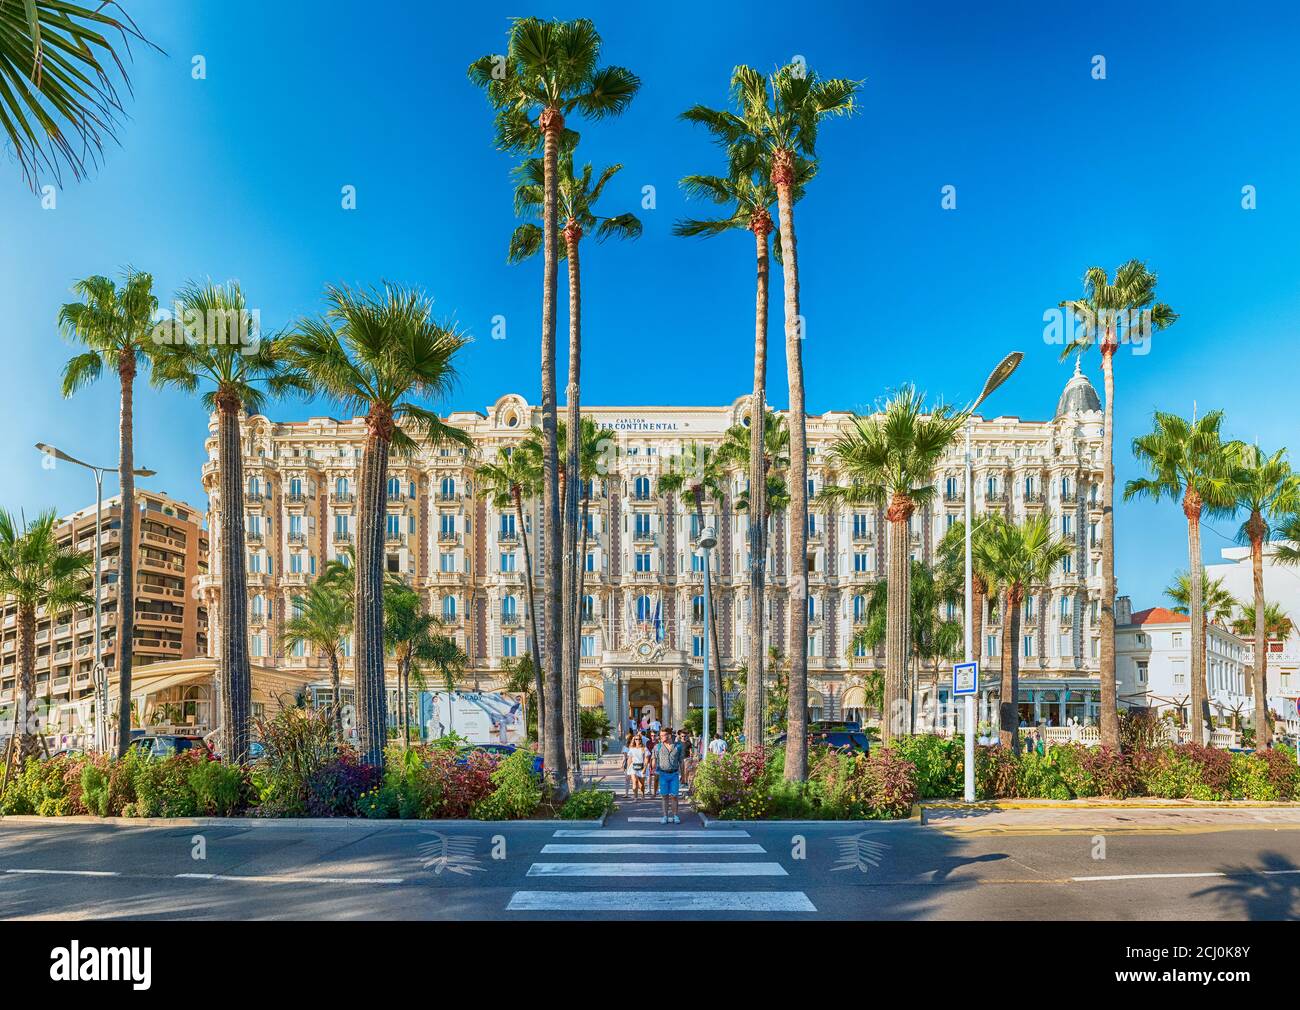 CANNES, FRANCE - AUGUST 15: The Intercontinental Carlton Hotel in Cannes, Cote d'Azur, France, as seen on August 15, 2019. It is a luxury hotel built Foto Stock